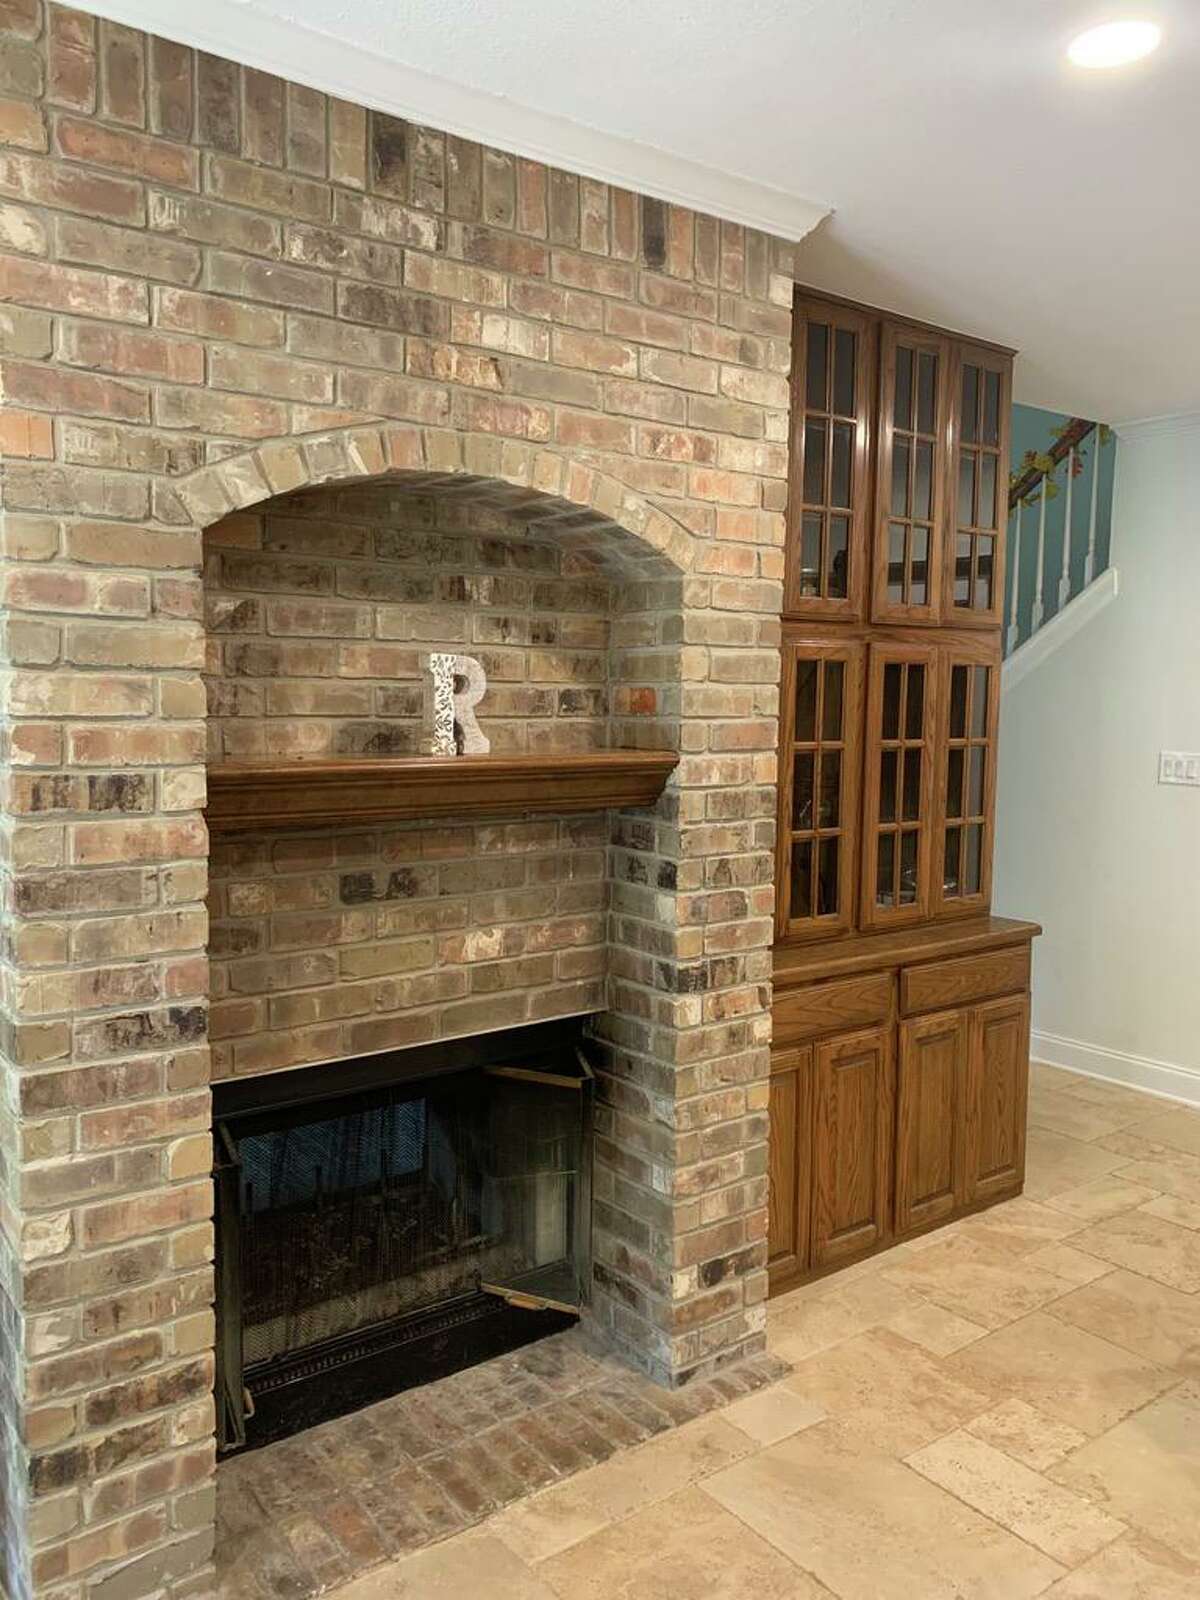 One of the kitchen features the couple wanted to keep is the brick-faced, double-sided wood-burning fireplace in the wall between the kitchen and the living room.